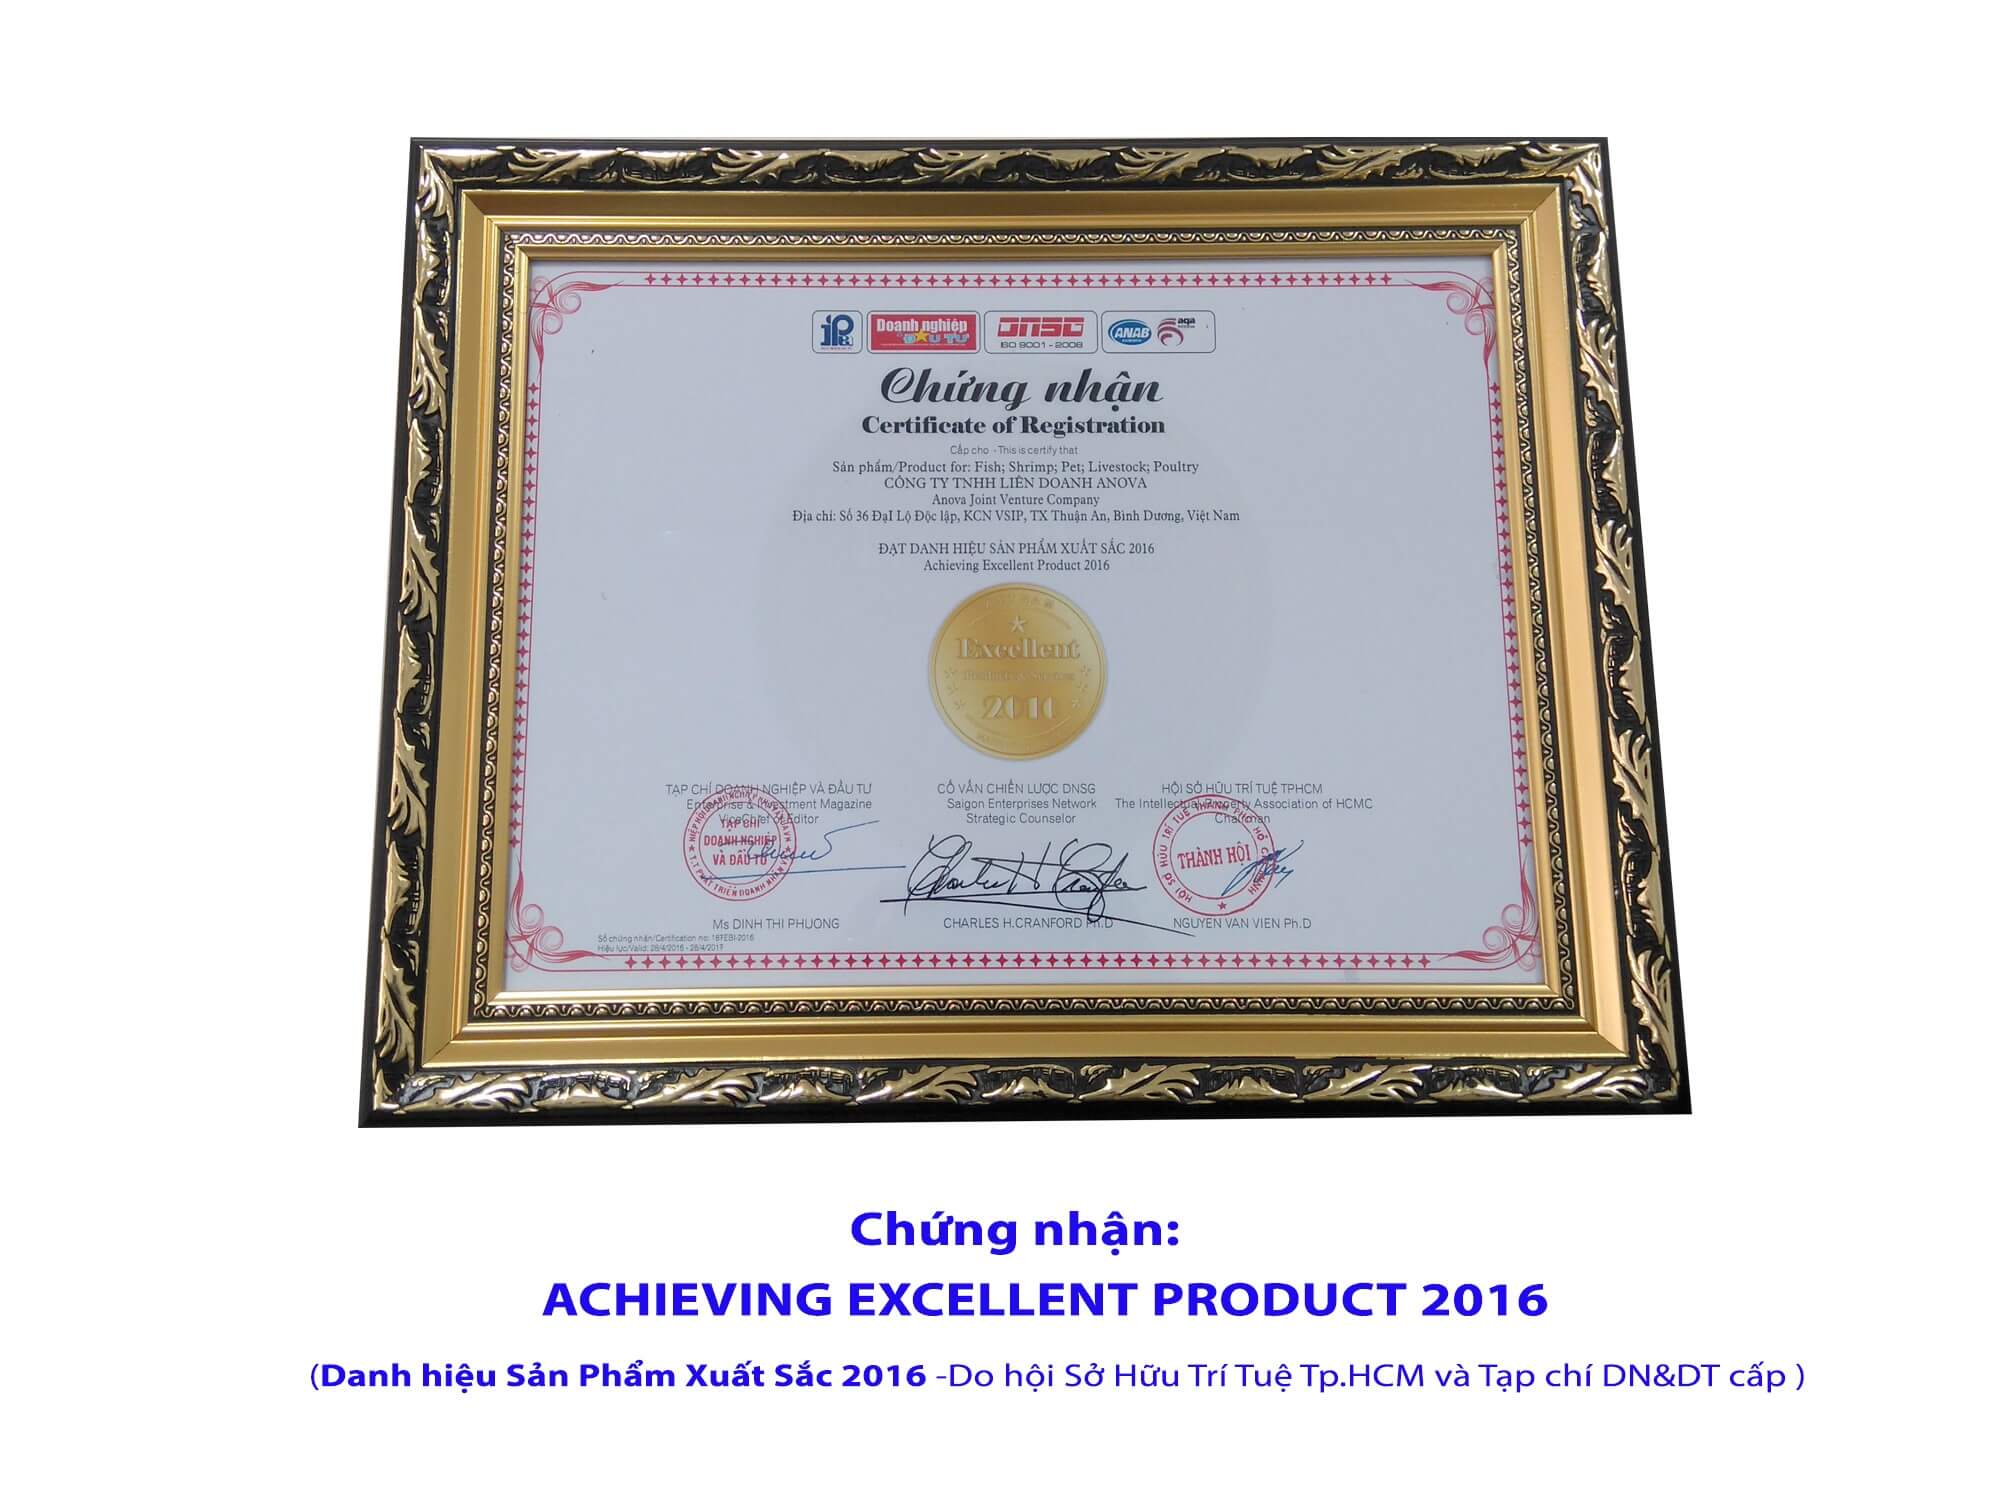 Certificate: Achieving Excellent Product 2016 (Awarded by the Intellectual Property Association of Ho Chi Minh City and Business & Investing Magazine)